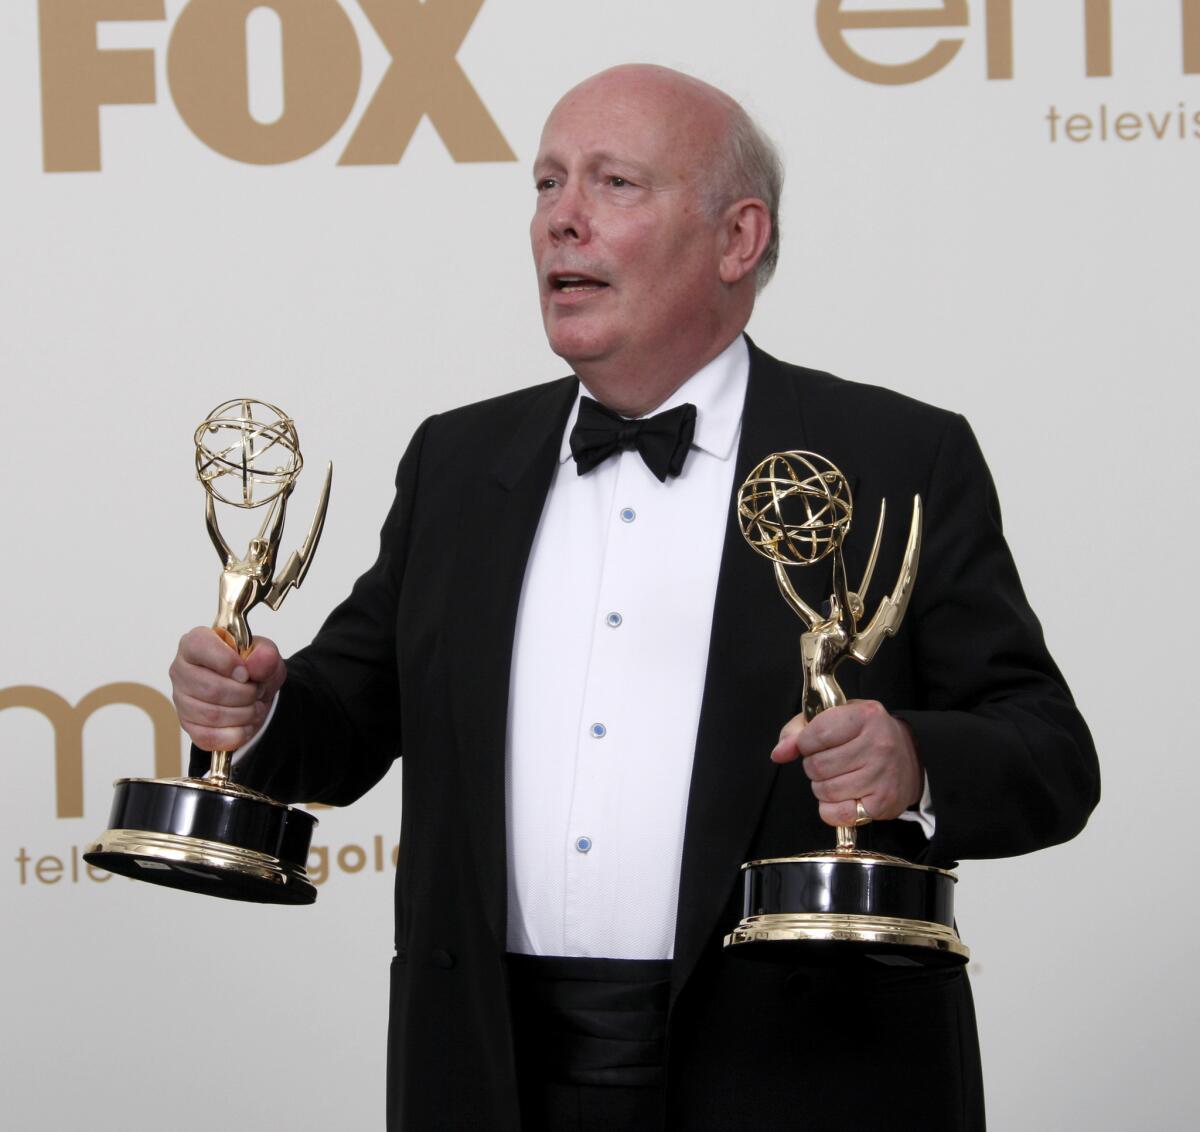 "Downton Abbey" creator Julian Fellowes holds Emmys awarded to his series in 2011.